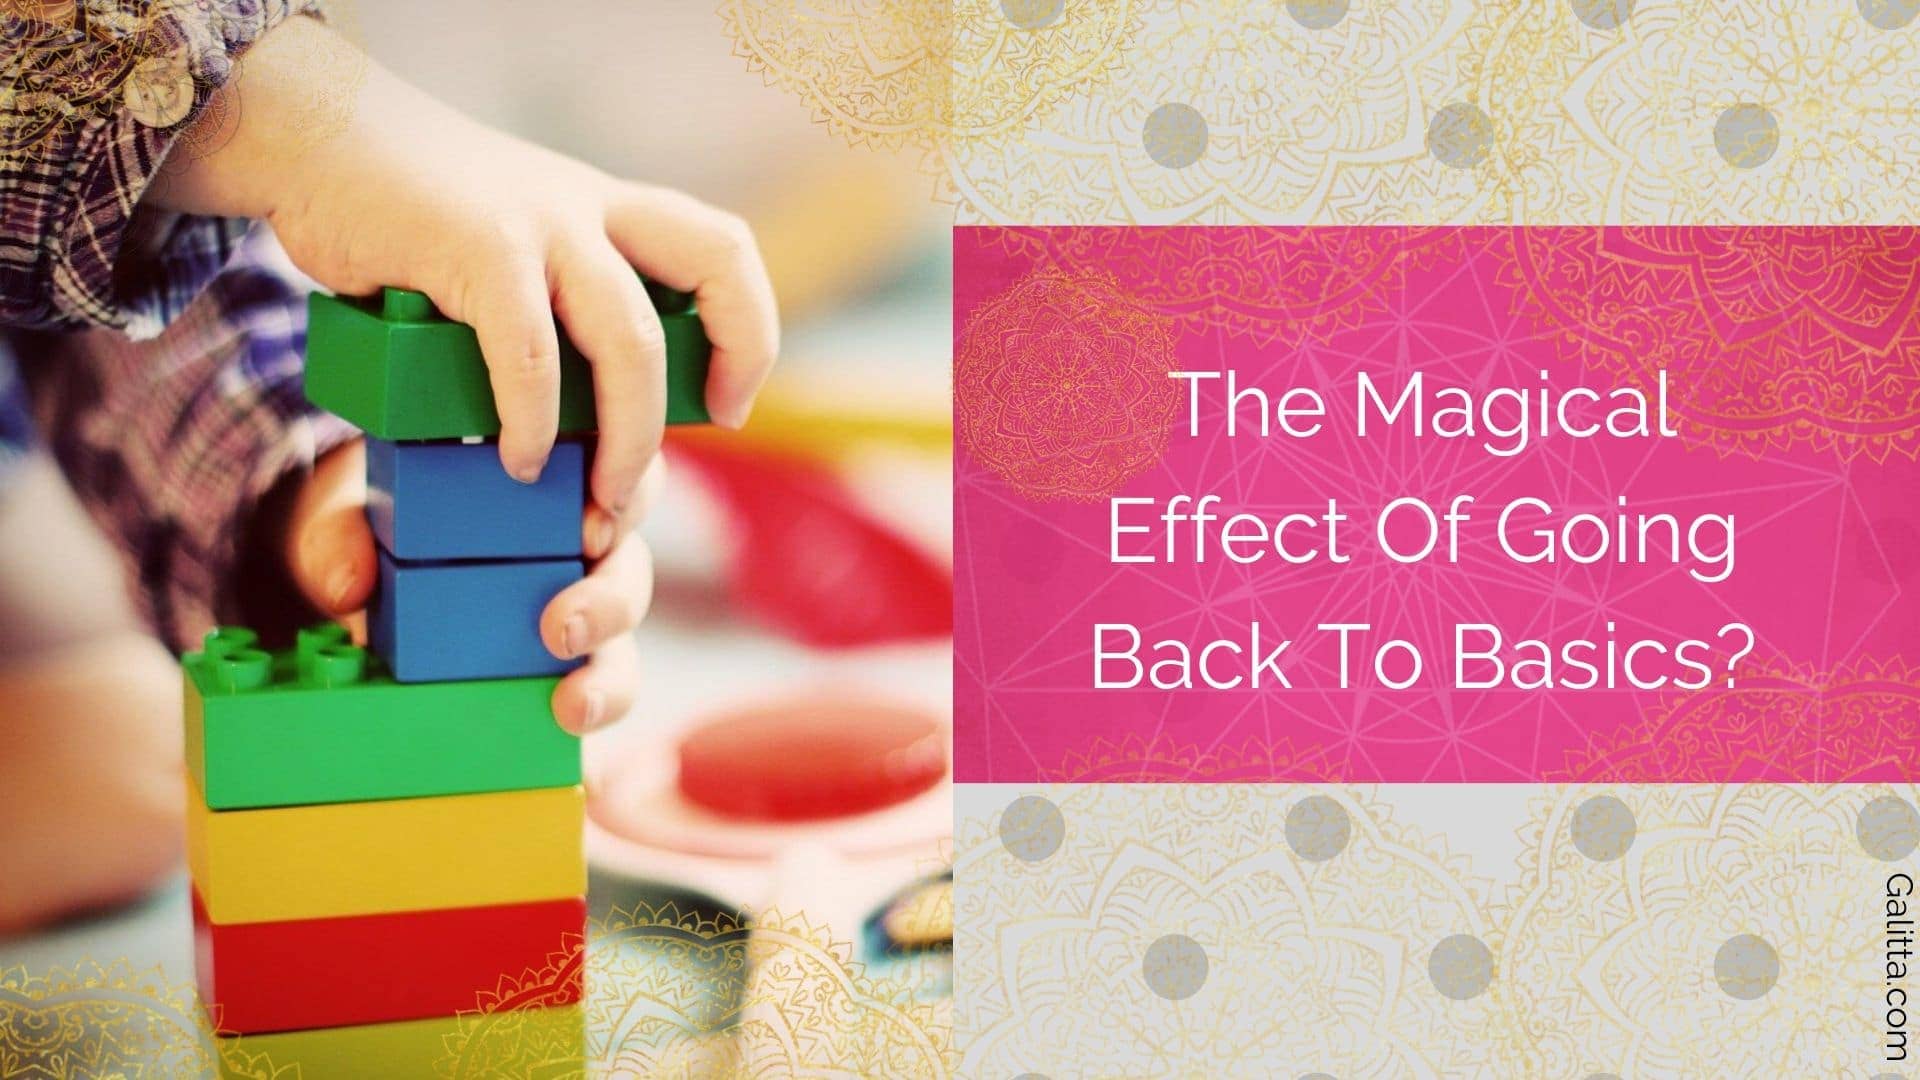 The Magical Effect of Going Back To Basics